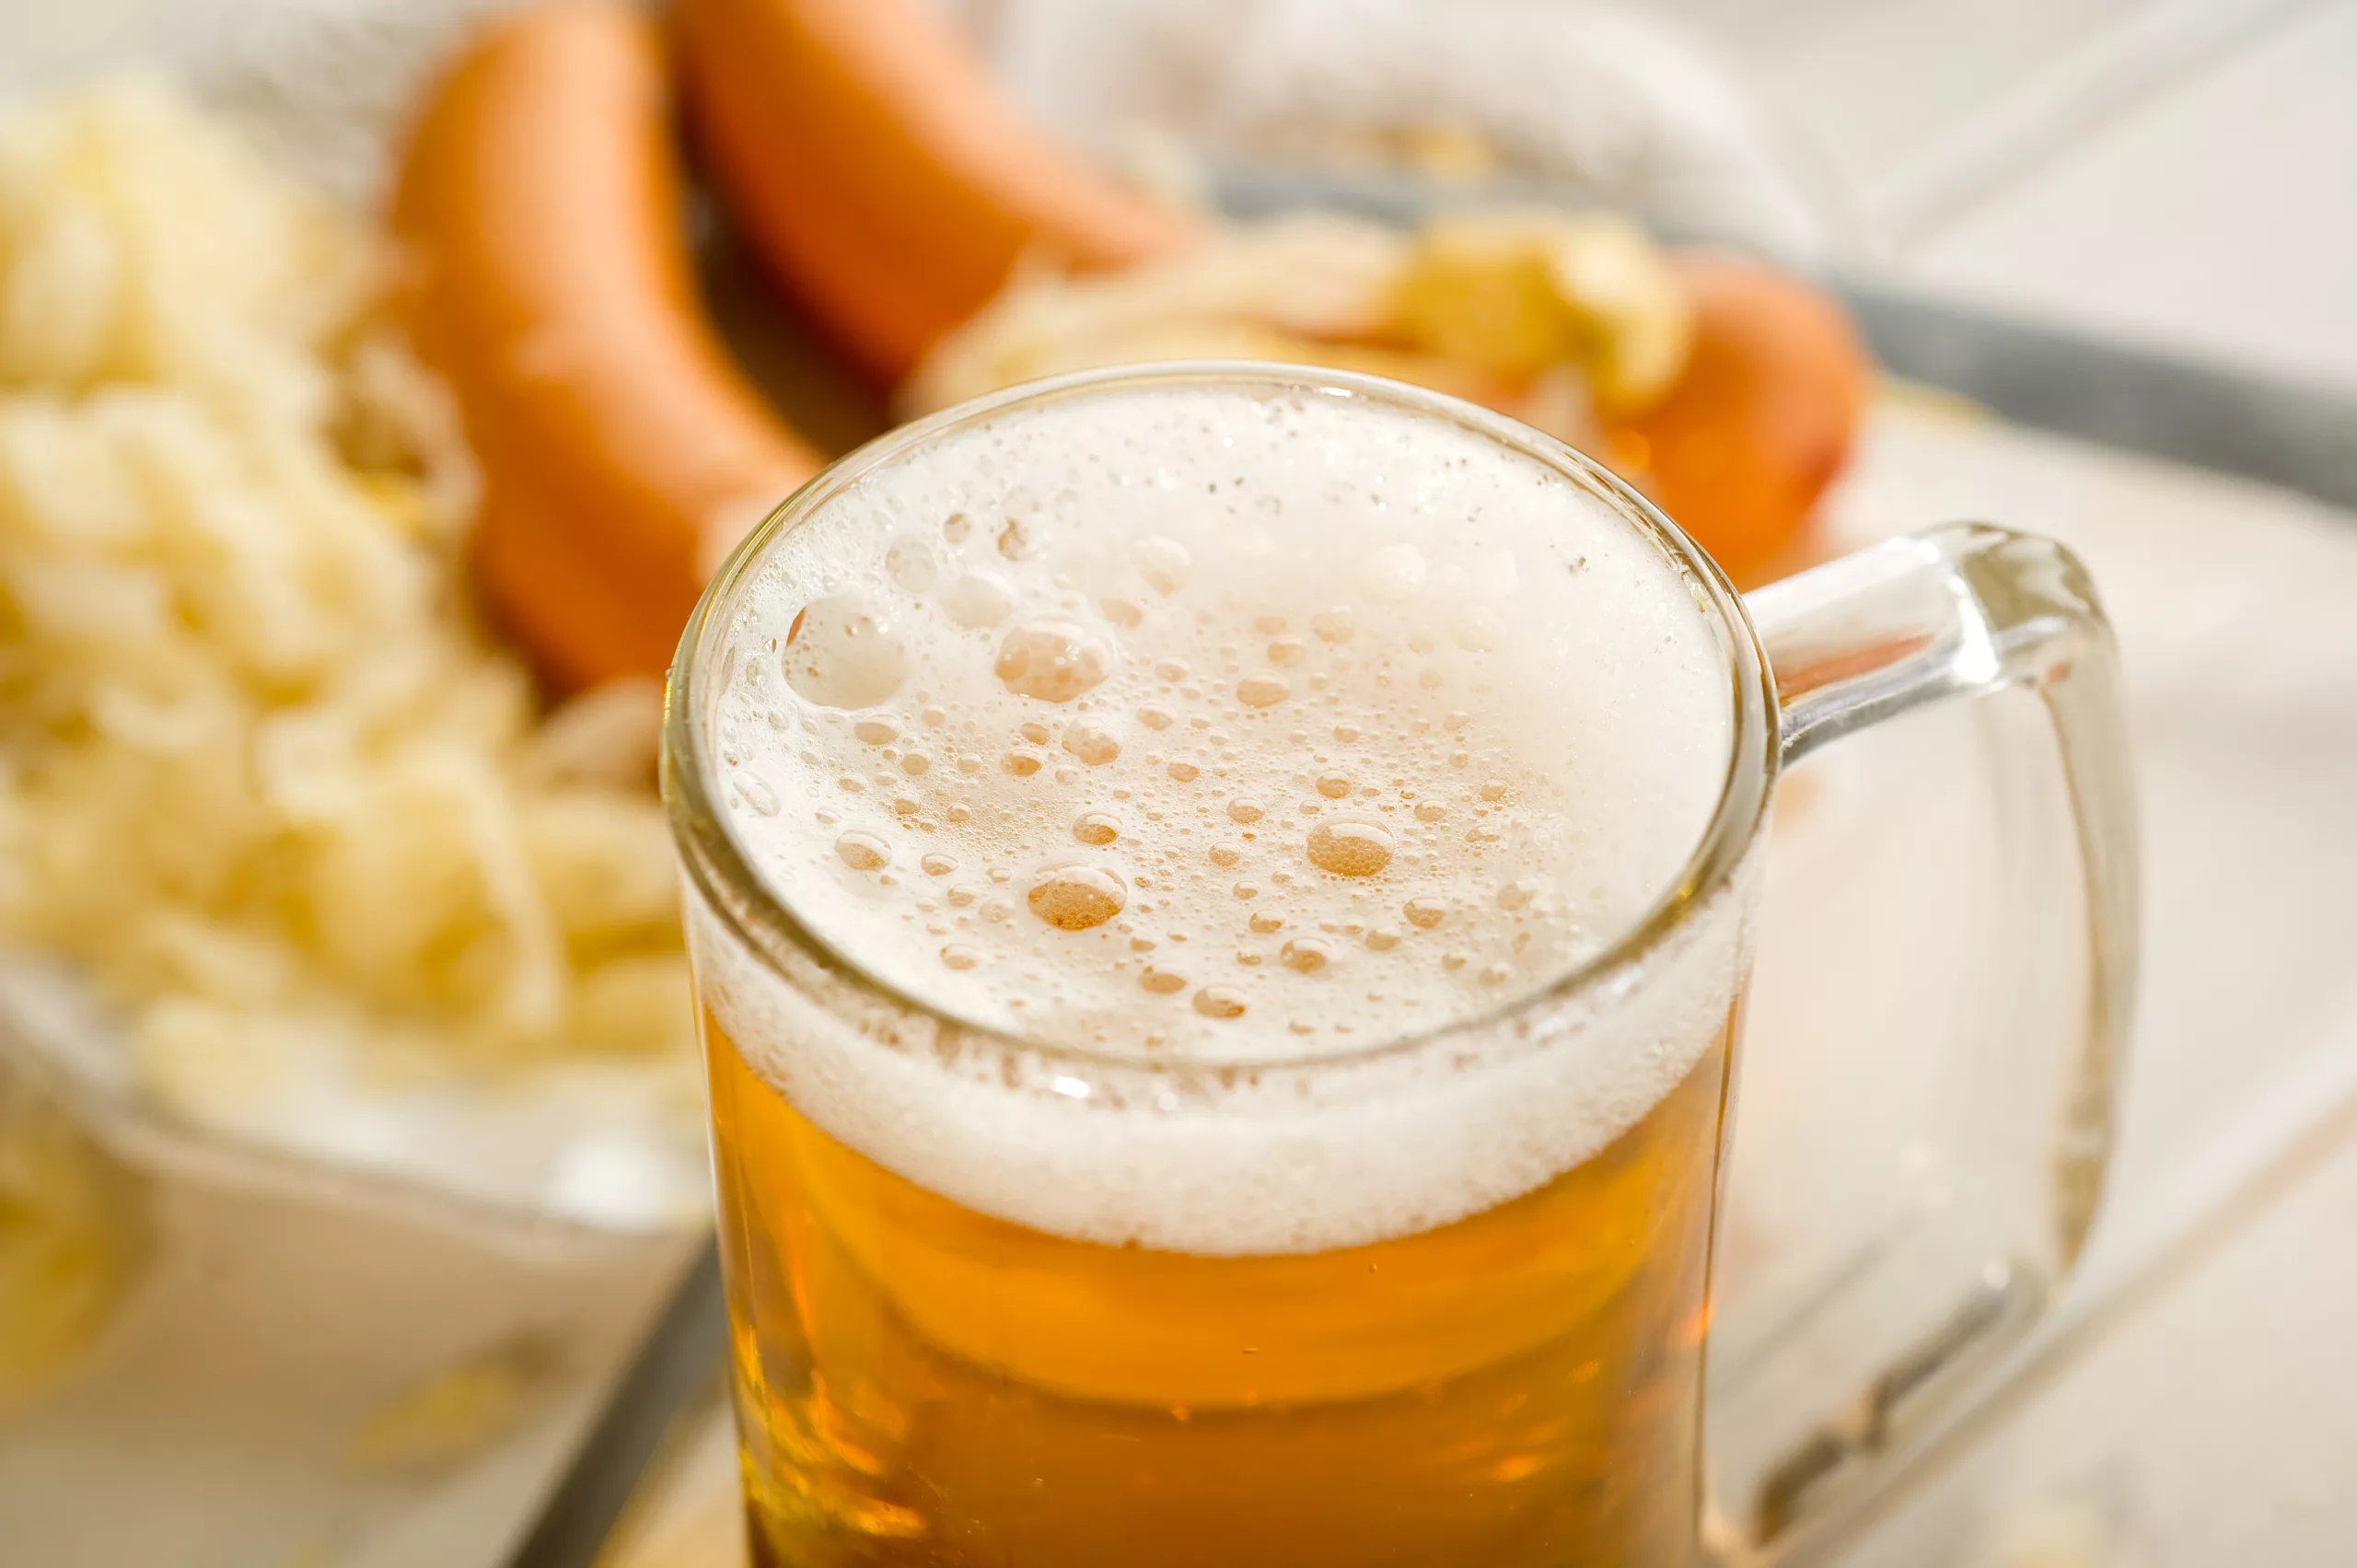 Why is German beer and German beer culture so famous and irresistible?